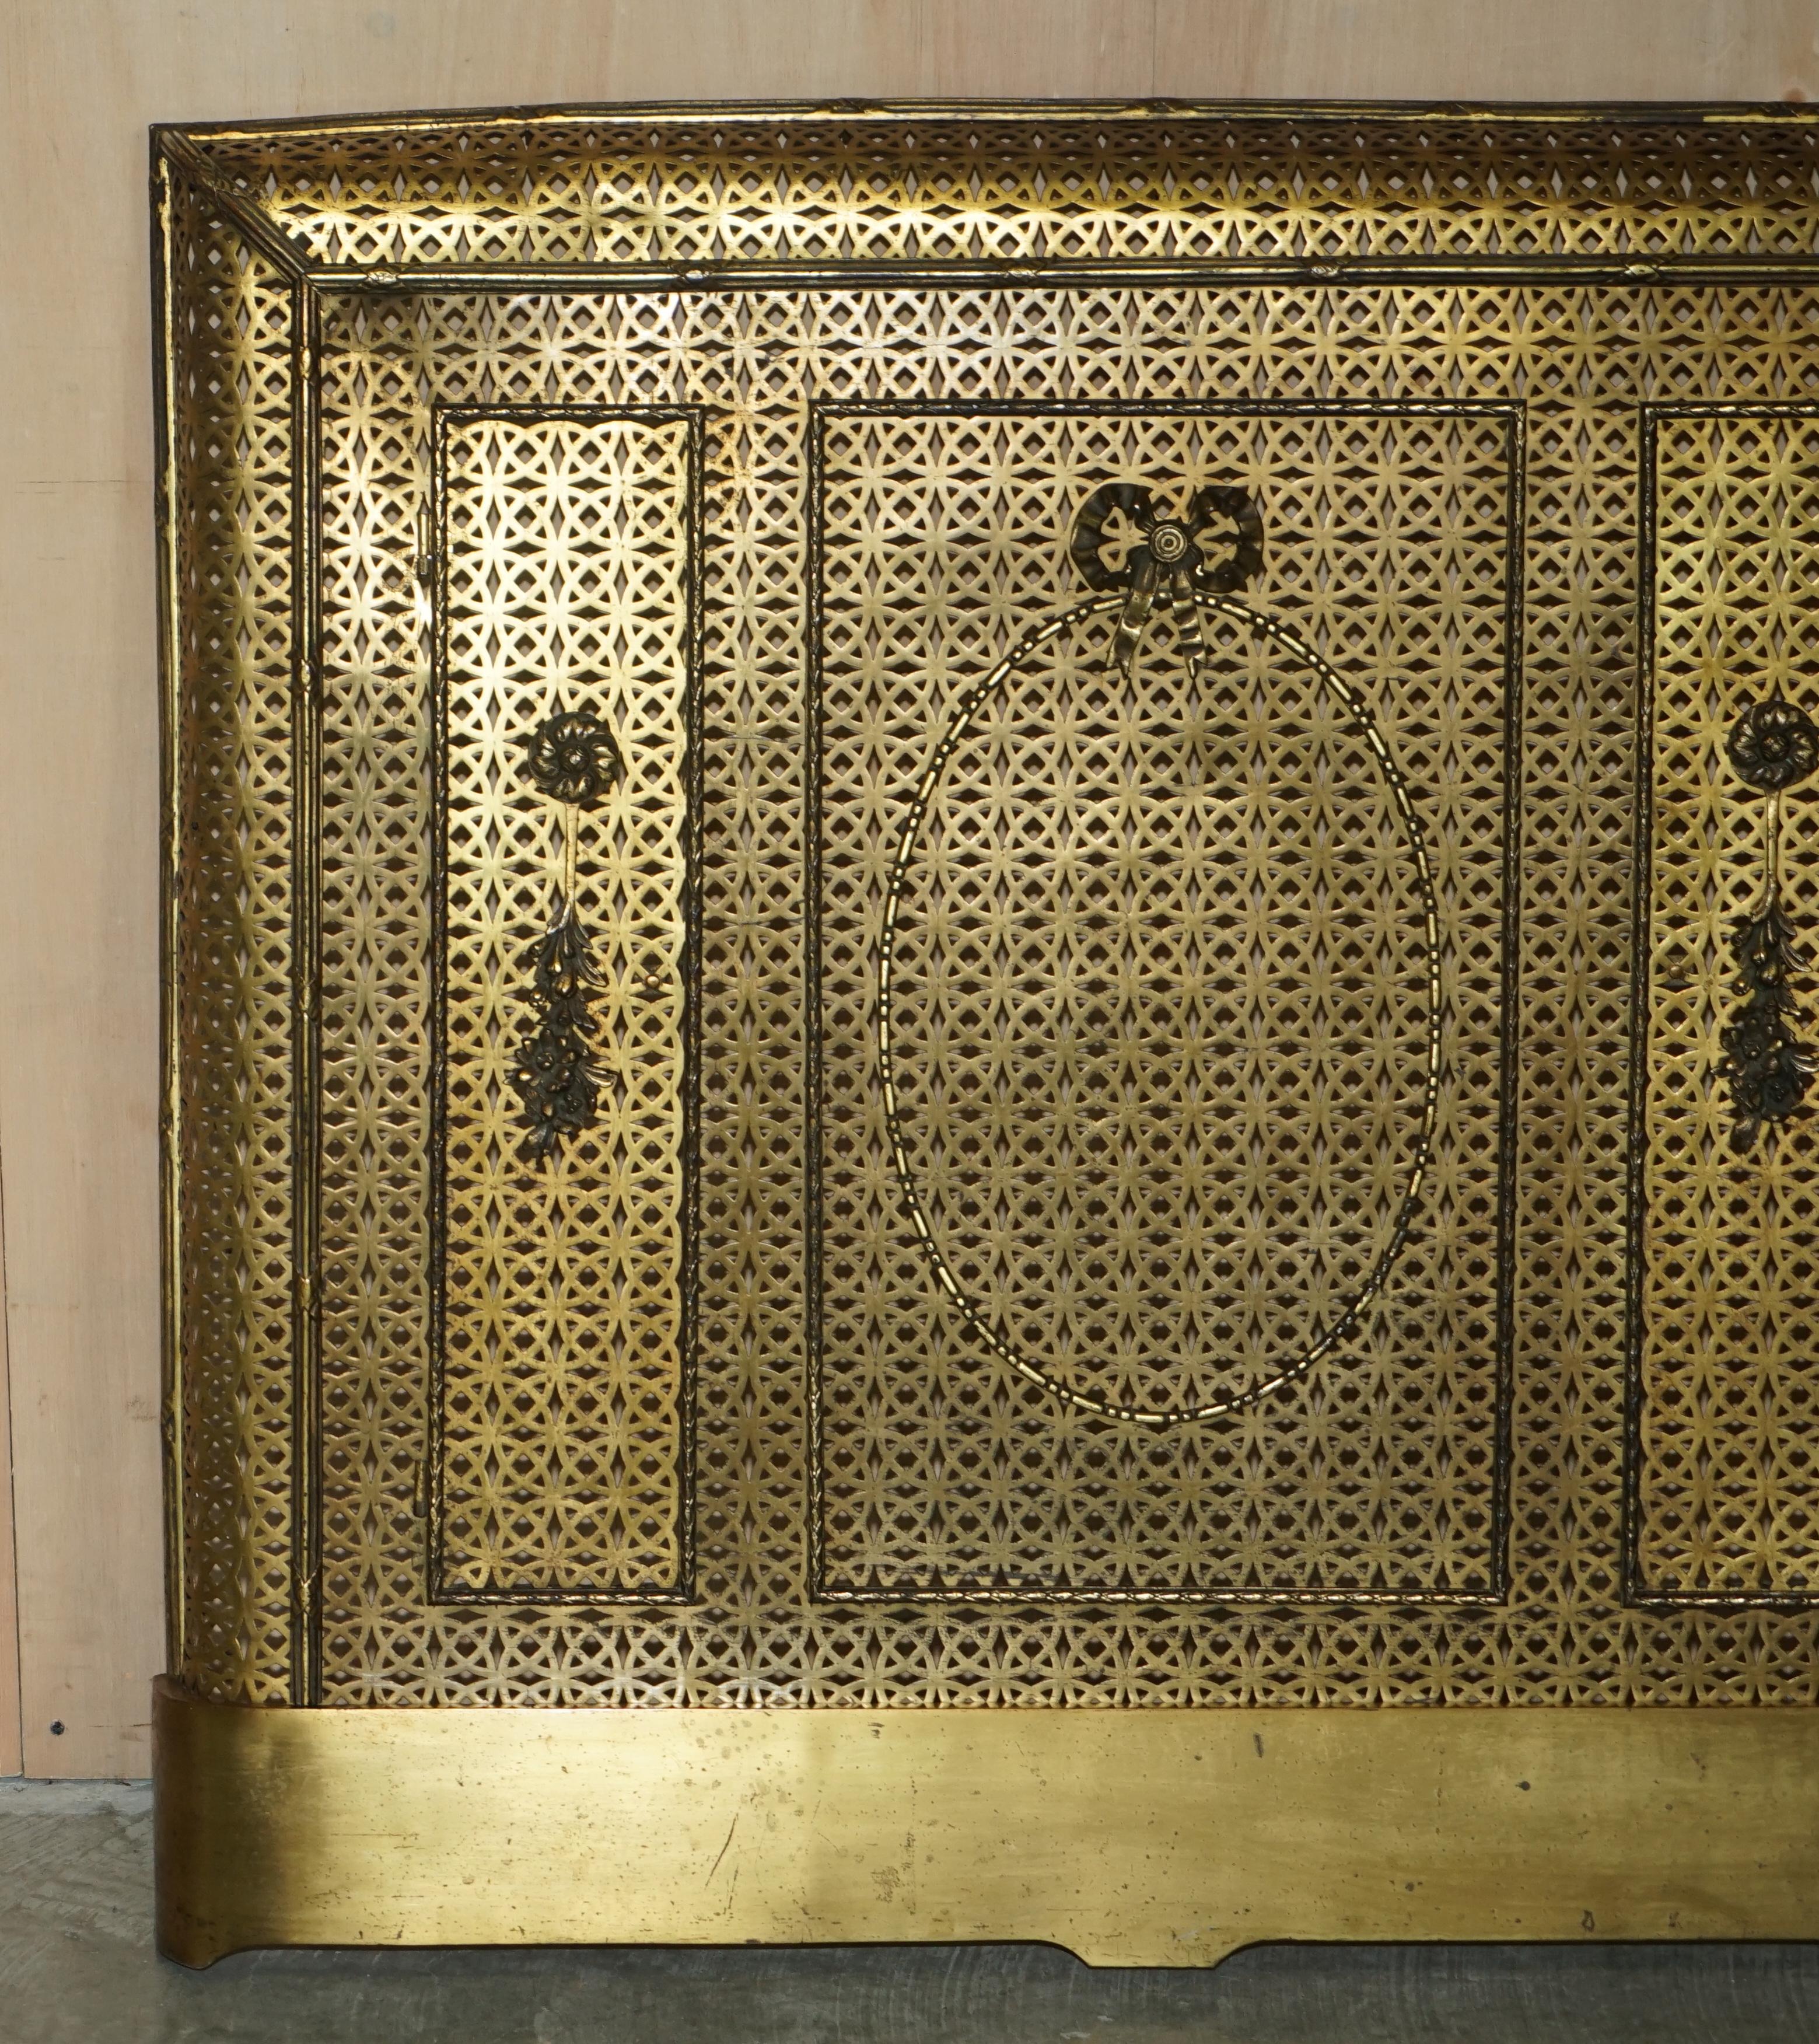 Hand-Crafted Antique circa 1920 Art Deco French Brass Pierced Sheet Radiator Cover with Doors